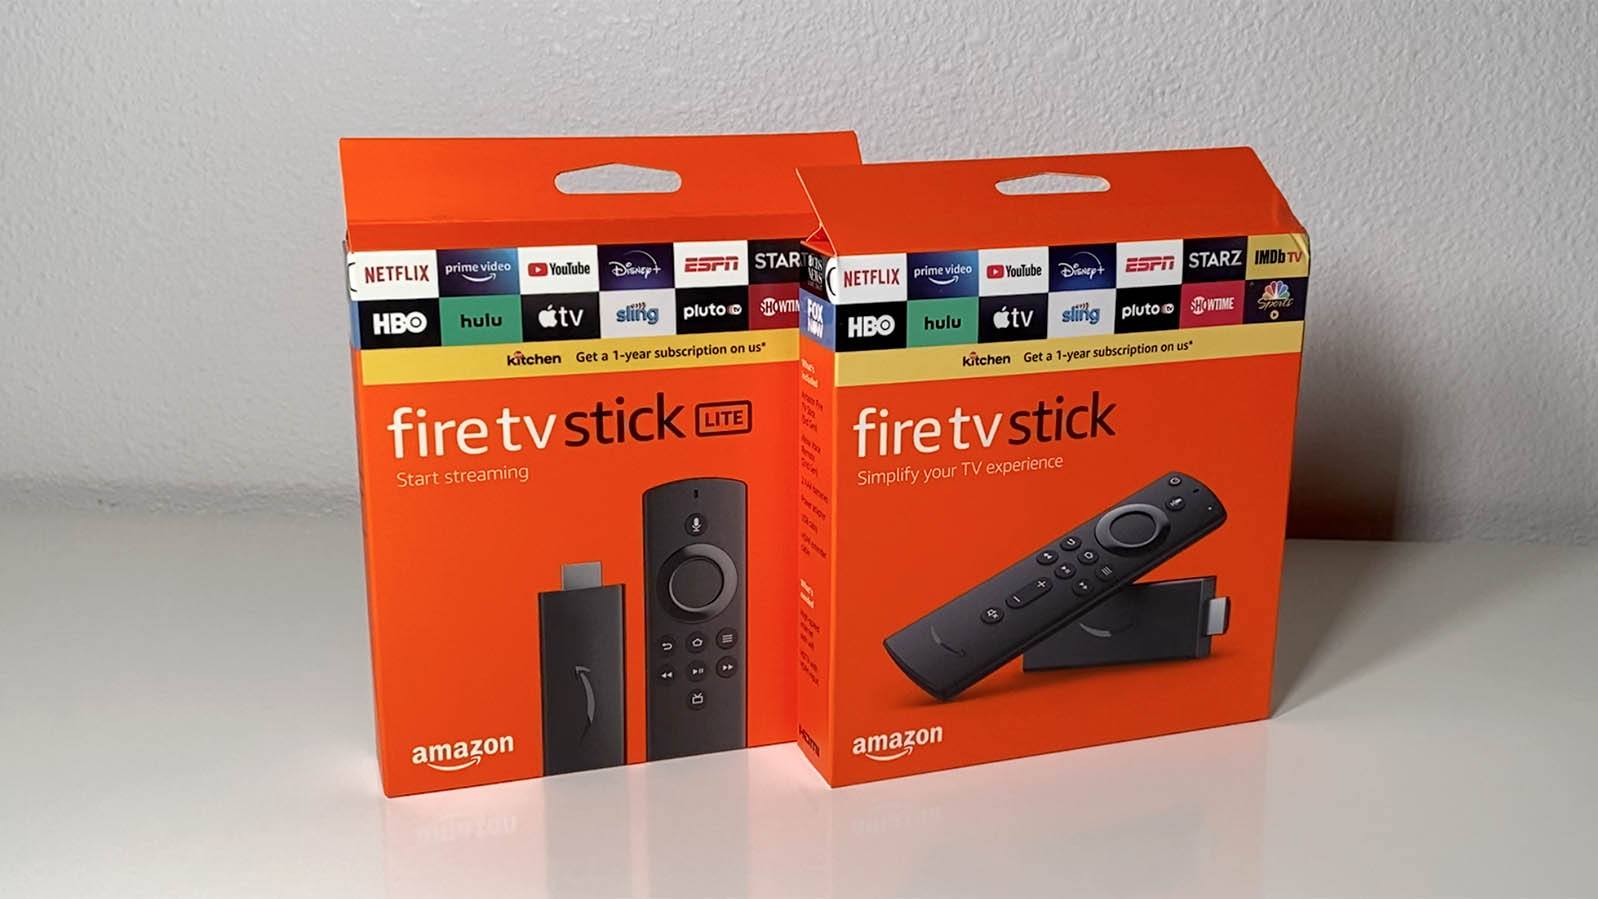 Amazon Fire TV Stick and Fire TV Stick Lite Review